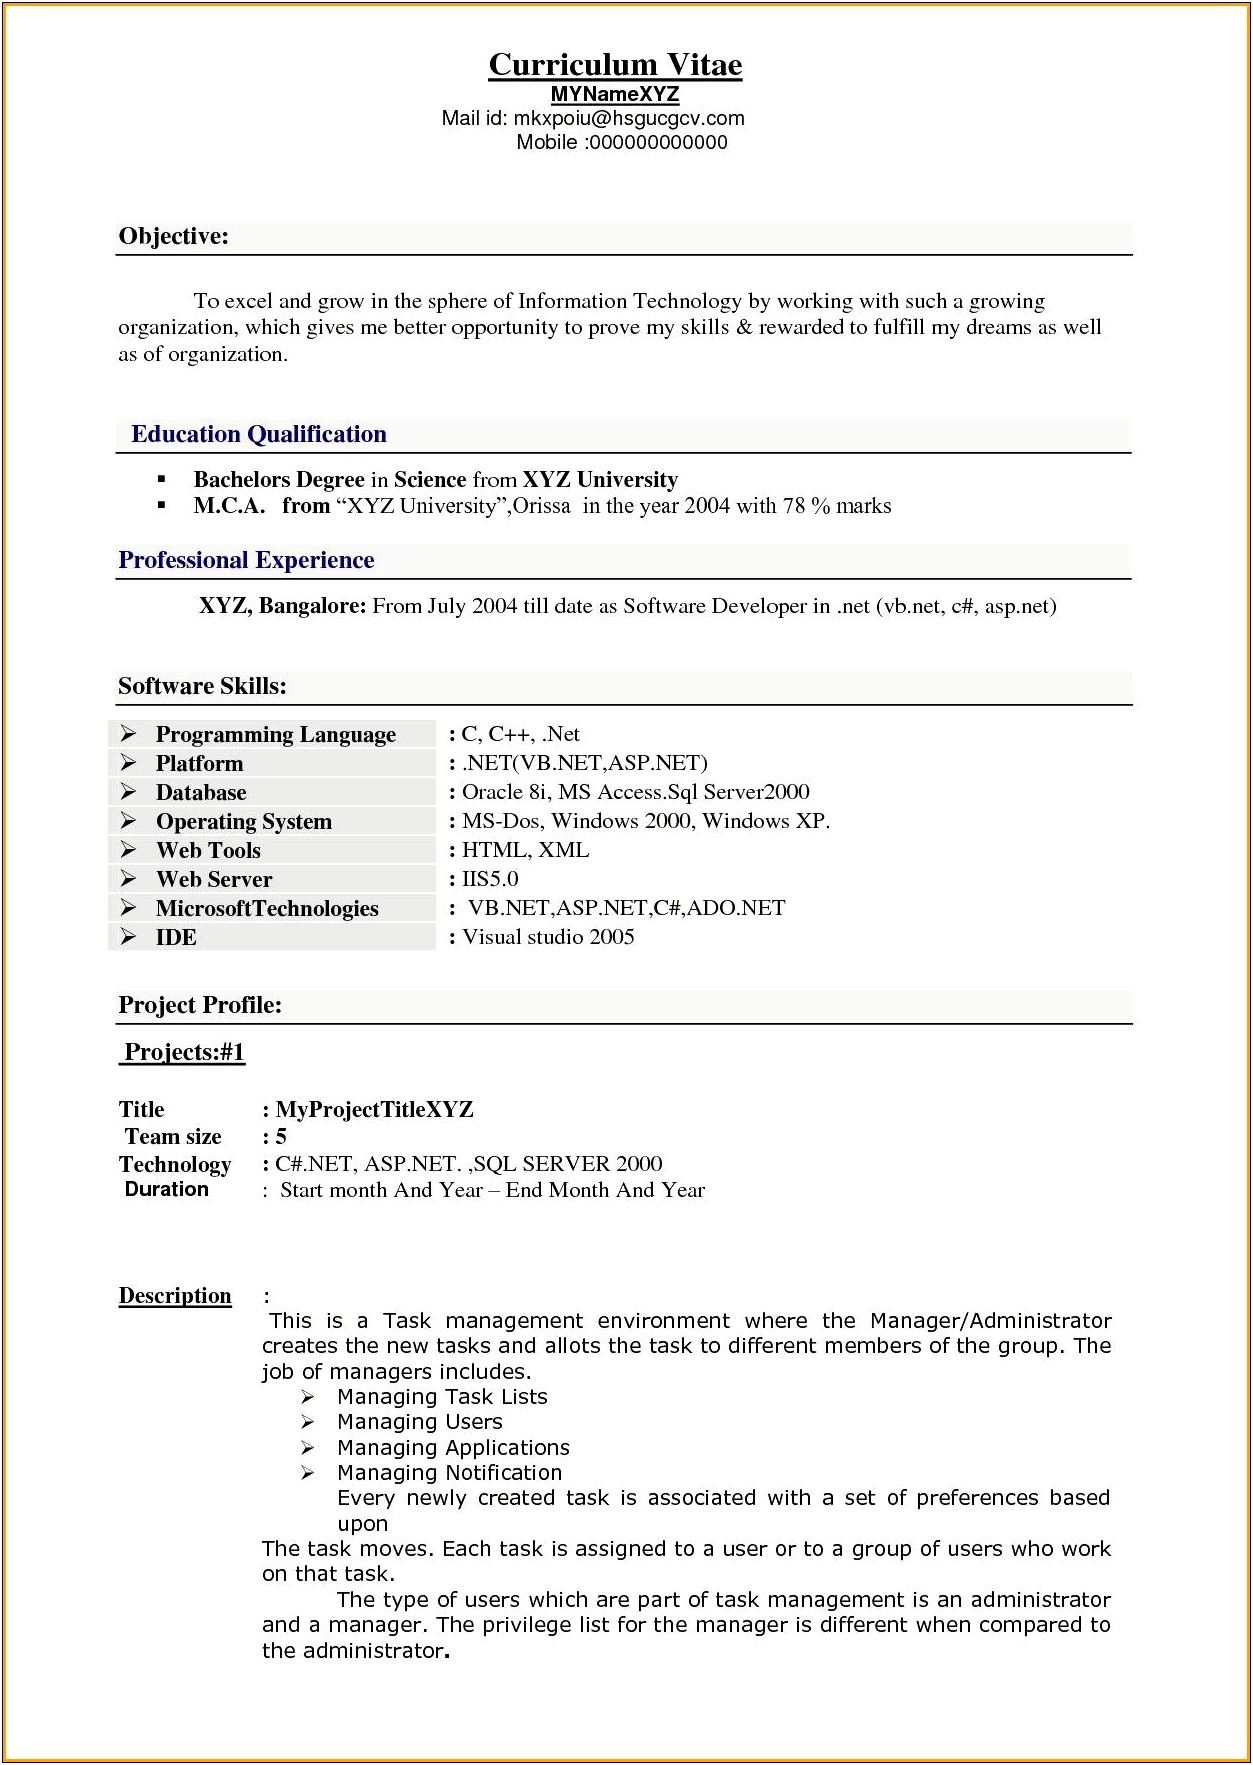 Windows System Administrator Resume 5 Years Experience Download